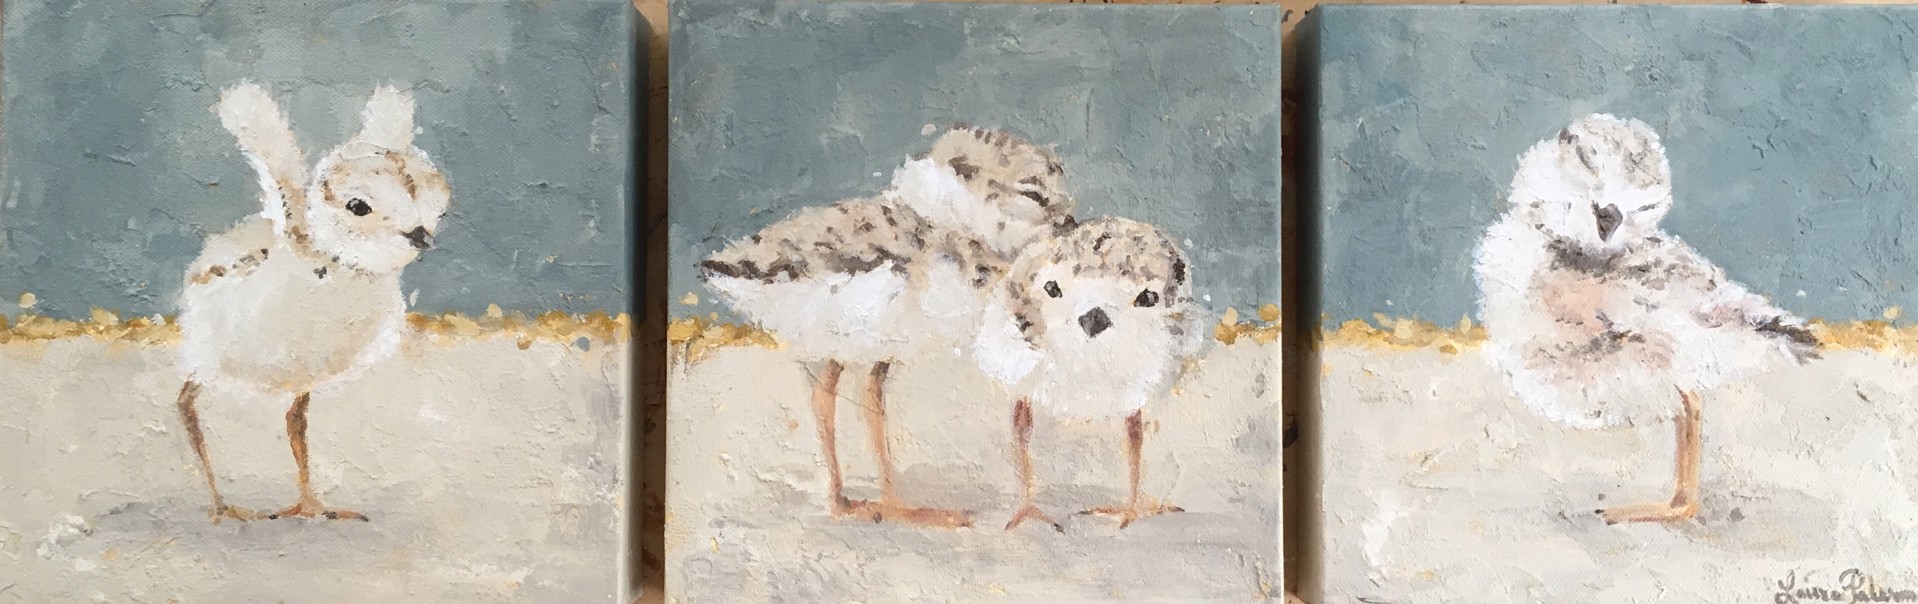 Piping Plovers Triptych - Set of 3 by Laura Palermo - Giclee Prints